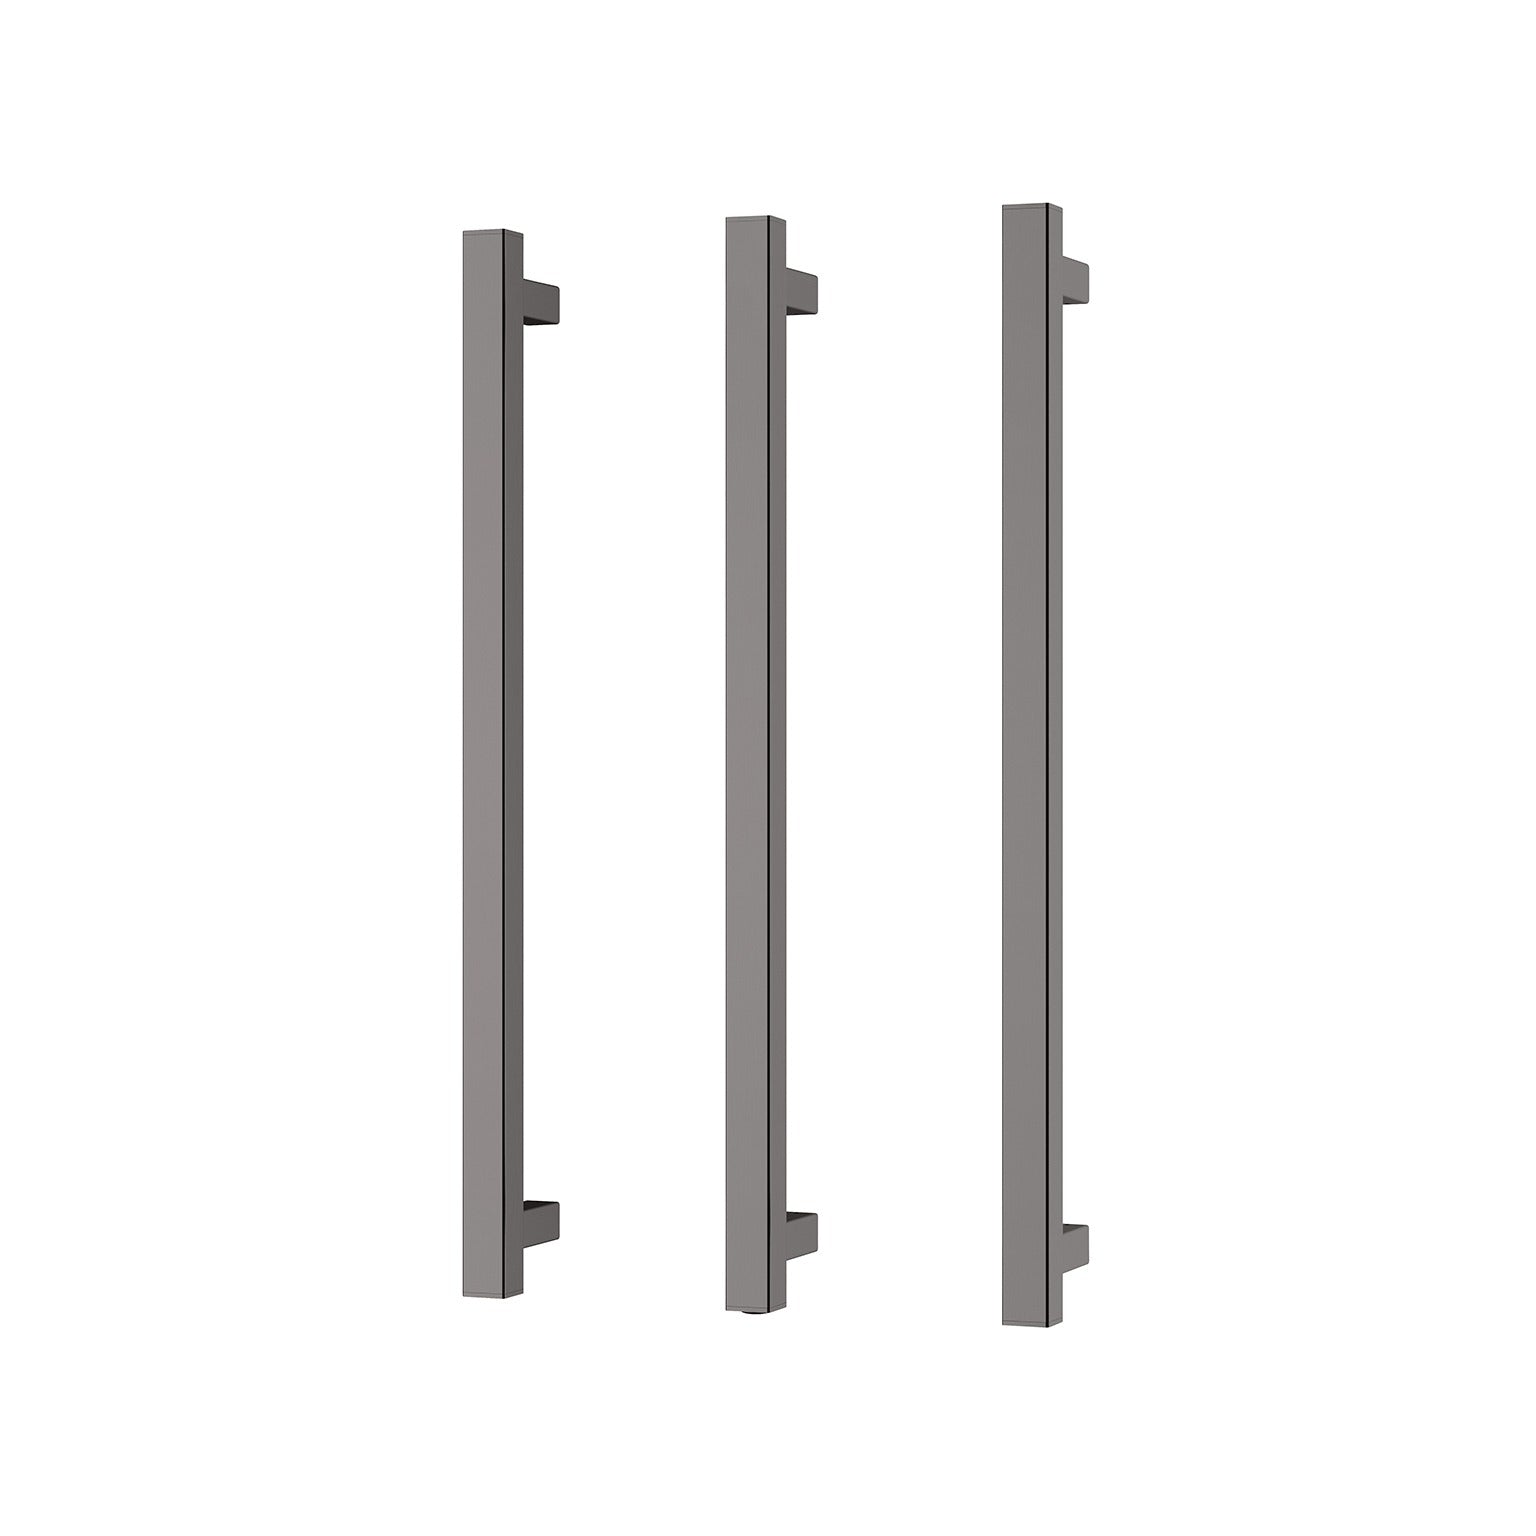 PHOENIX SQUARE TRIPLE HEATED TOWEL RAIL BRUSHED CARBON (AVAILABLE IN 600MM AND 800MM)